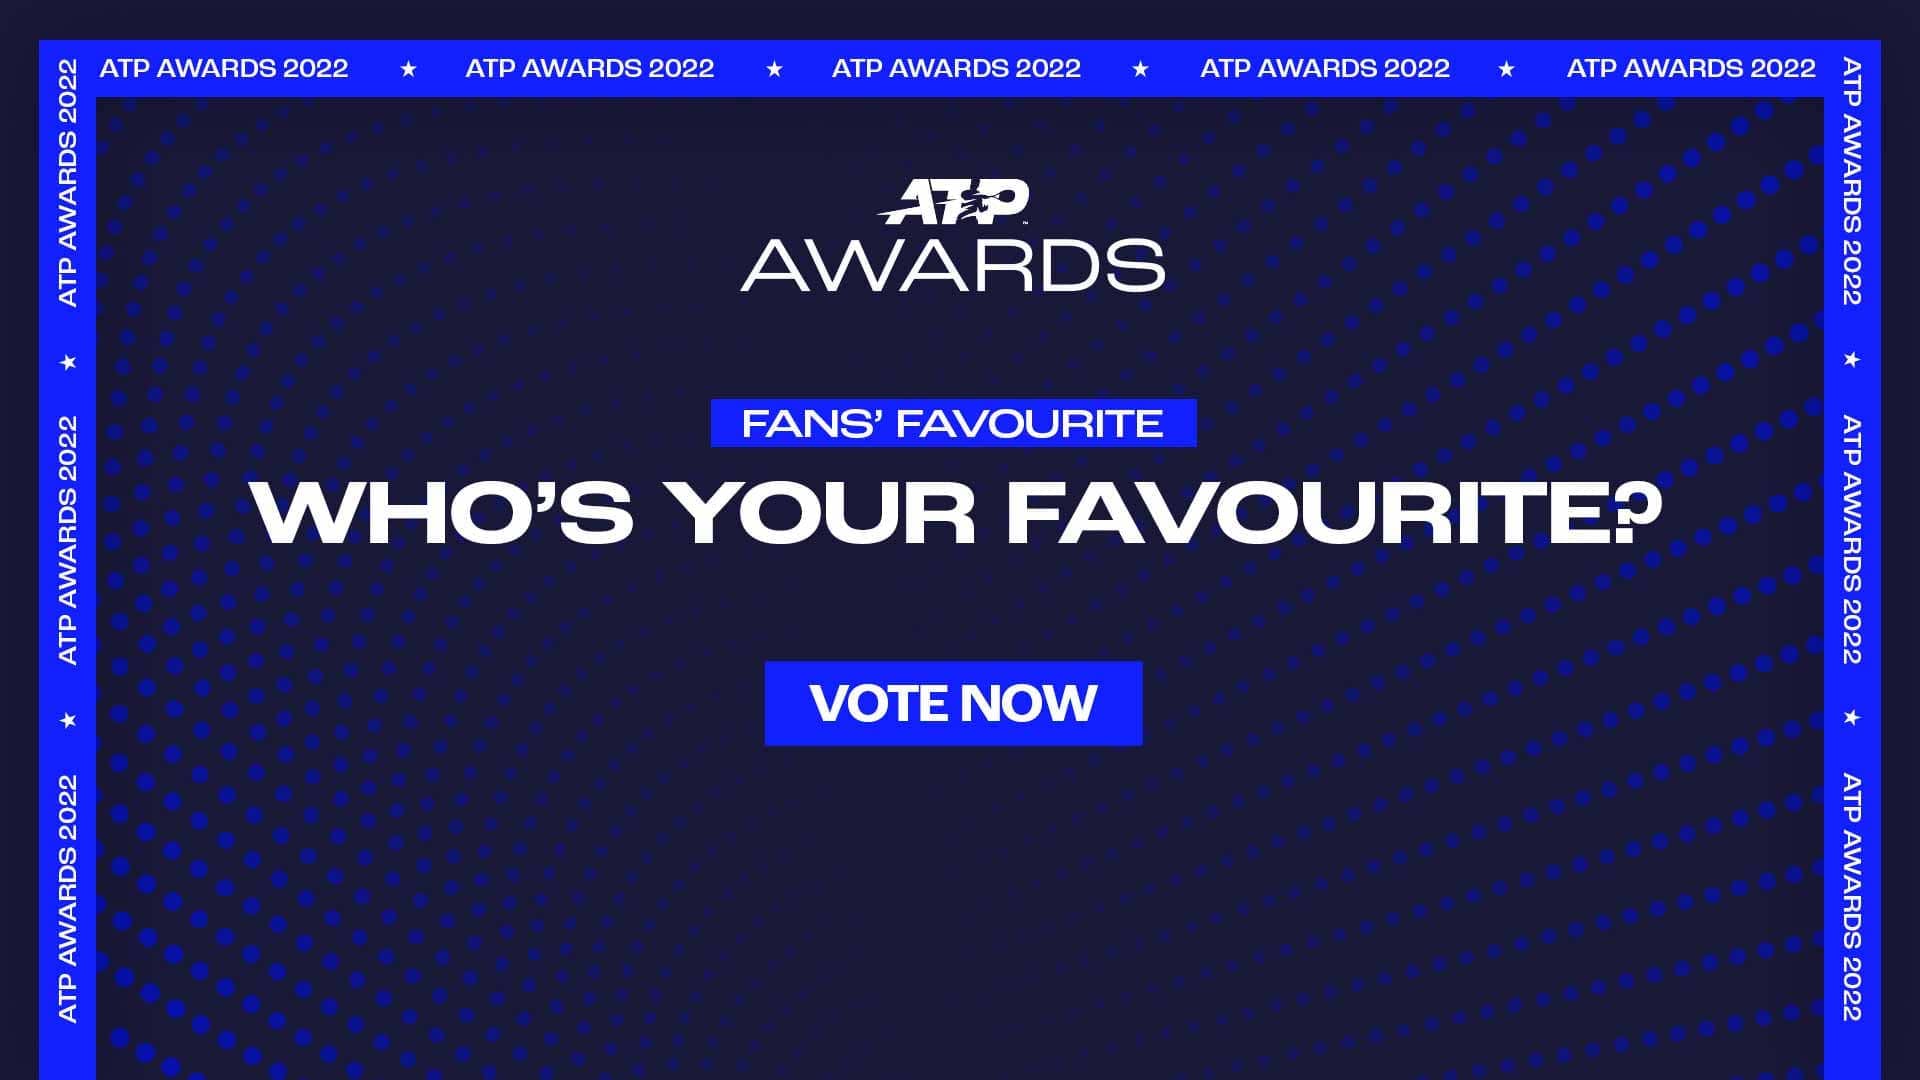 Who will be named Fans' Favourite? Vote for your favourite men's tennis players in the 2022 ATP Awards